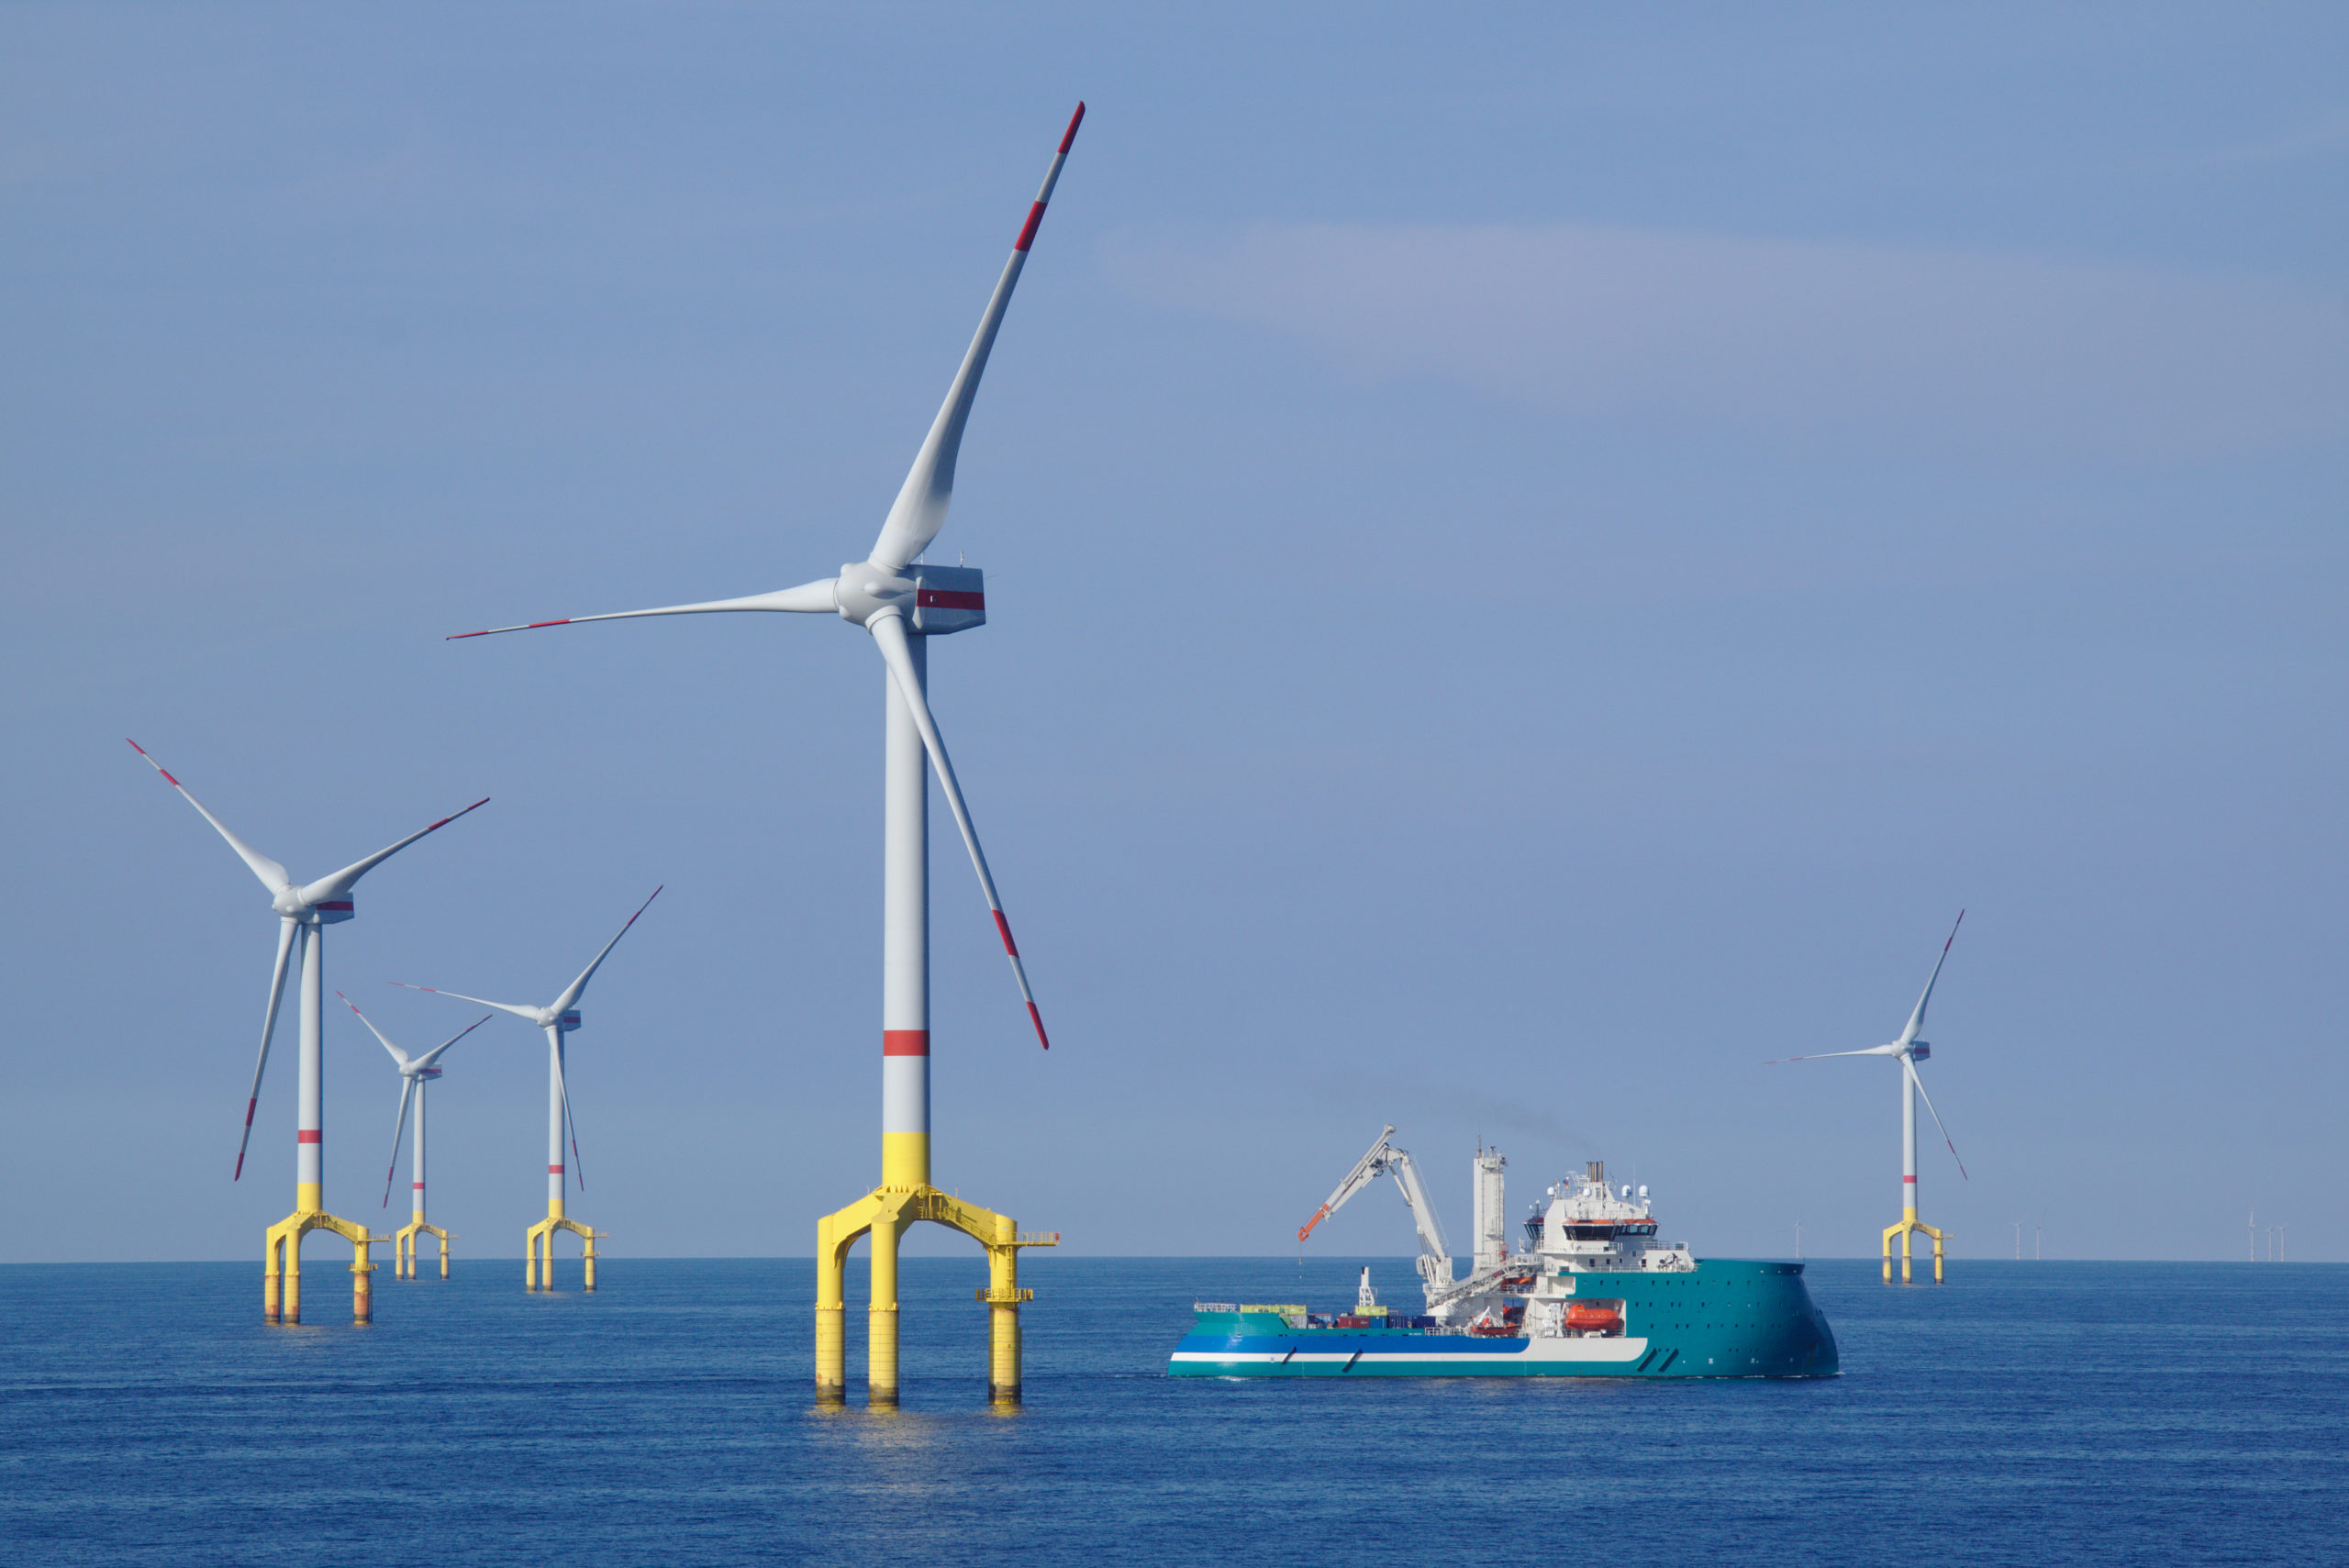 Offshore wind turbine with supply boat in the north sea with blue sky and sea